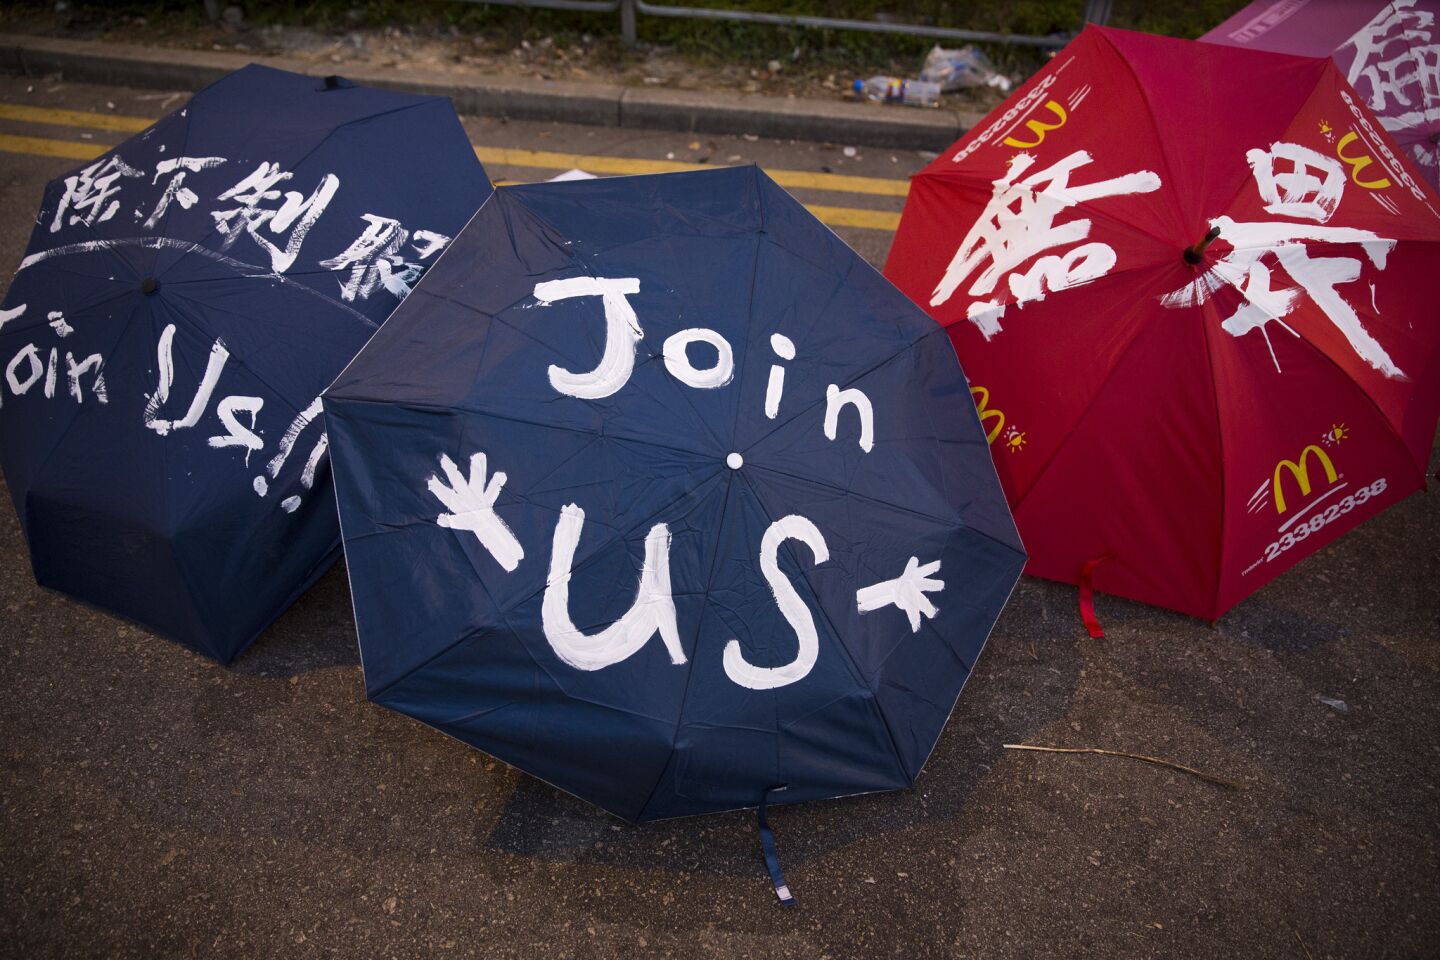 Umbrellas are painted with slogans at the protest site as the numbers of protesters continue to grow in Hong Kong.